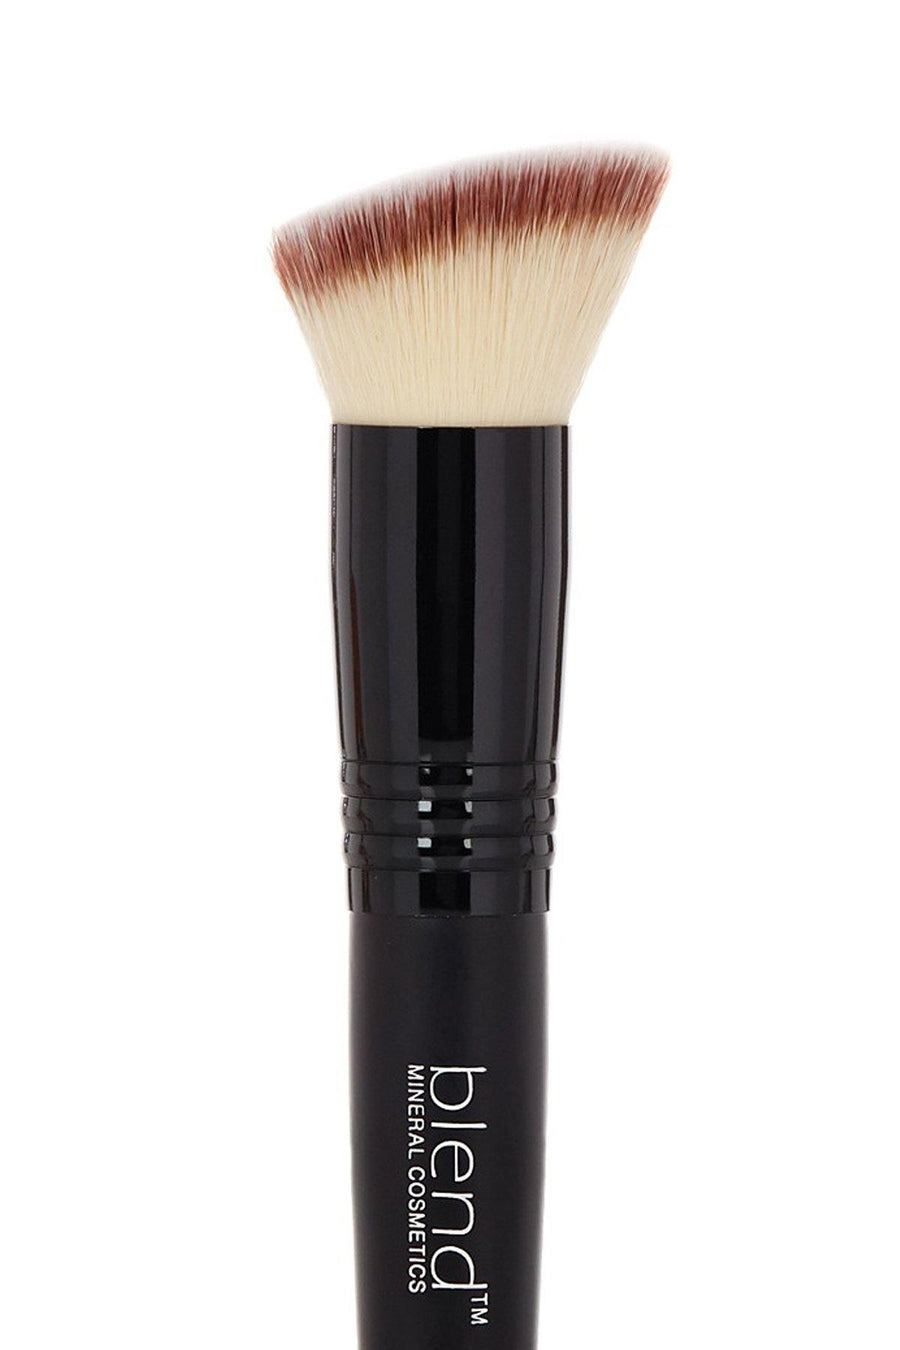 The Amazing Makeup Brush Cleaner – Sugar & Cotton